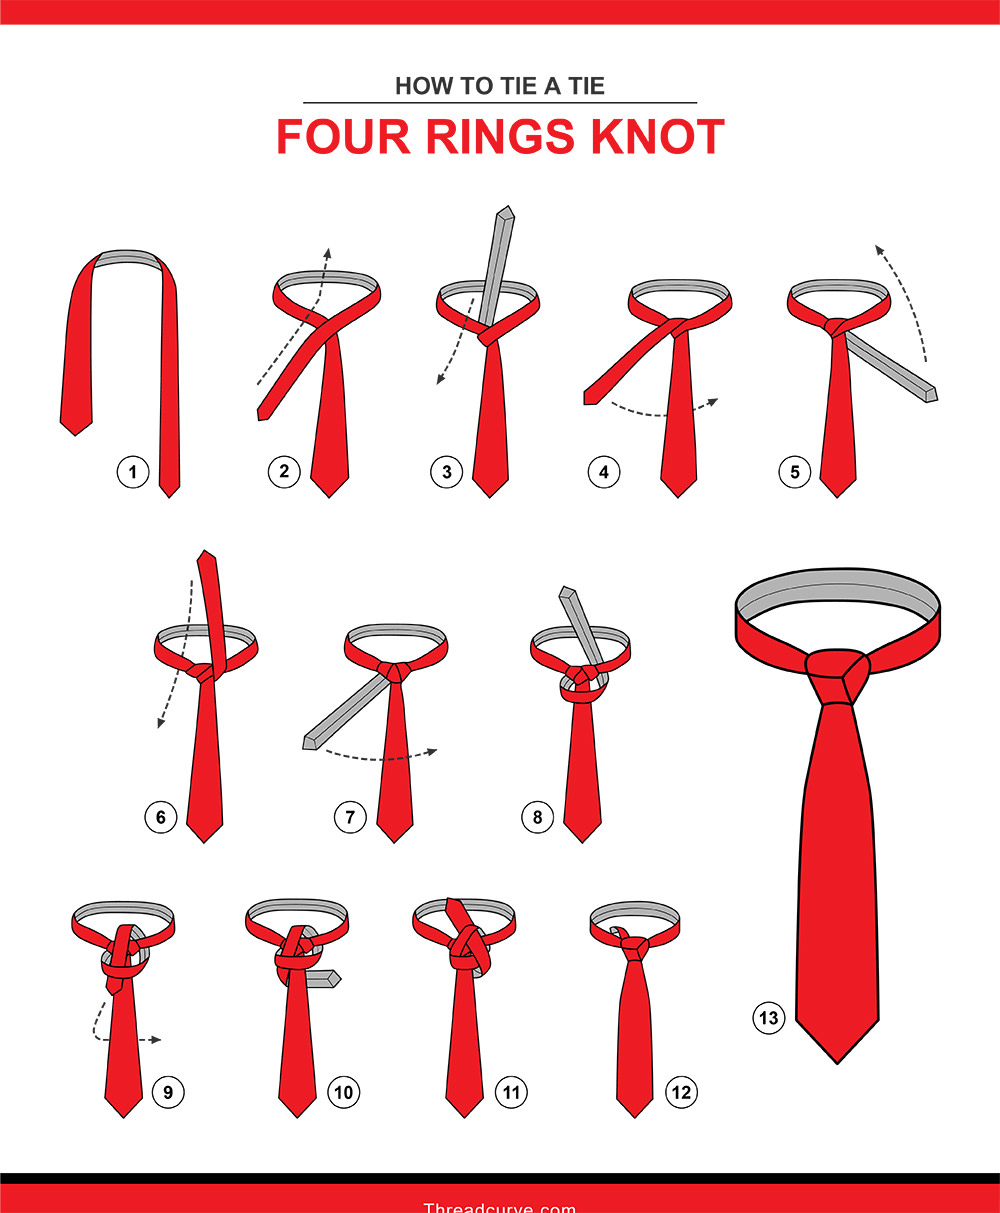 How to tie a four rings knot (illustration)